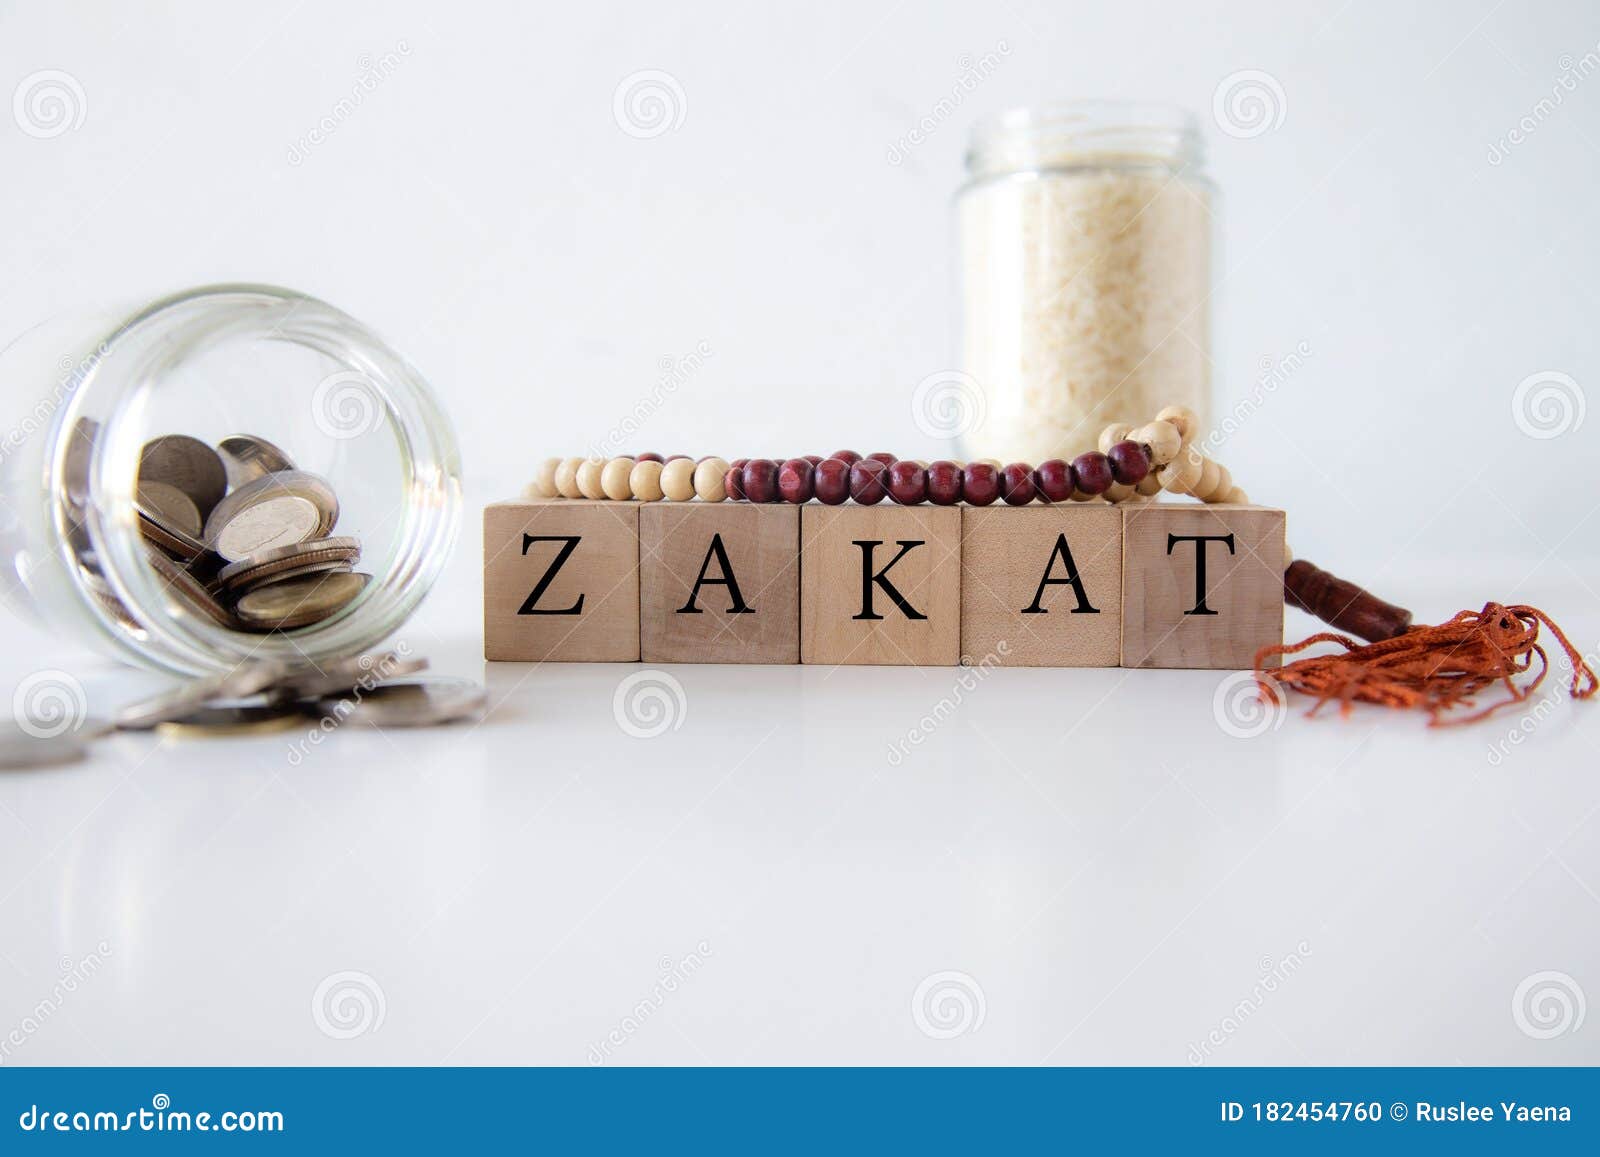 How Do I Pay Missed Zakat from Previous Years  SeekersGuidance